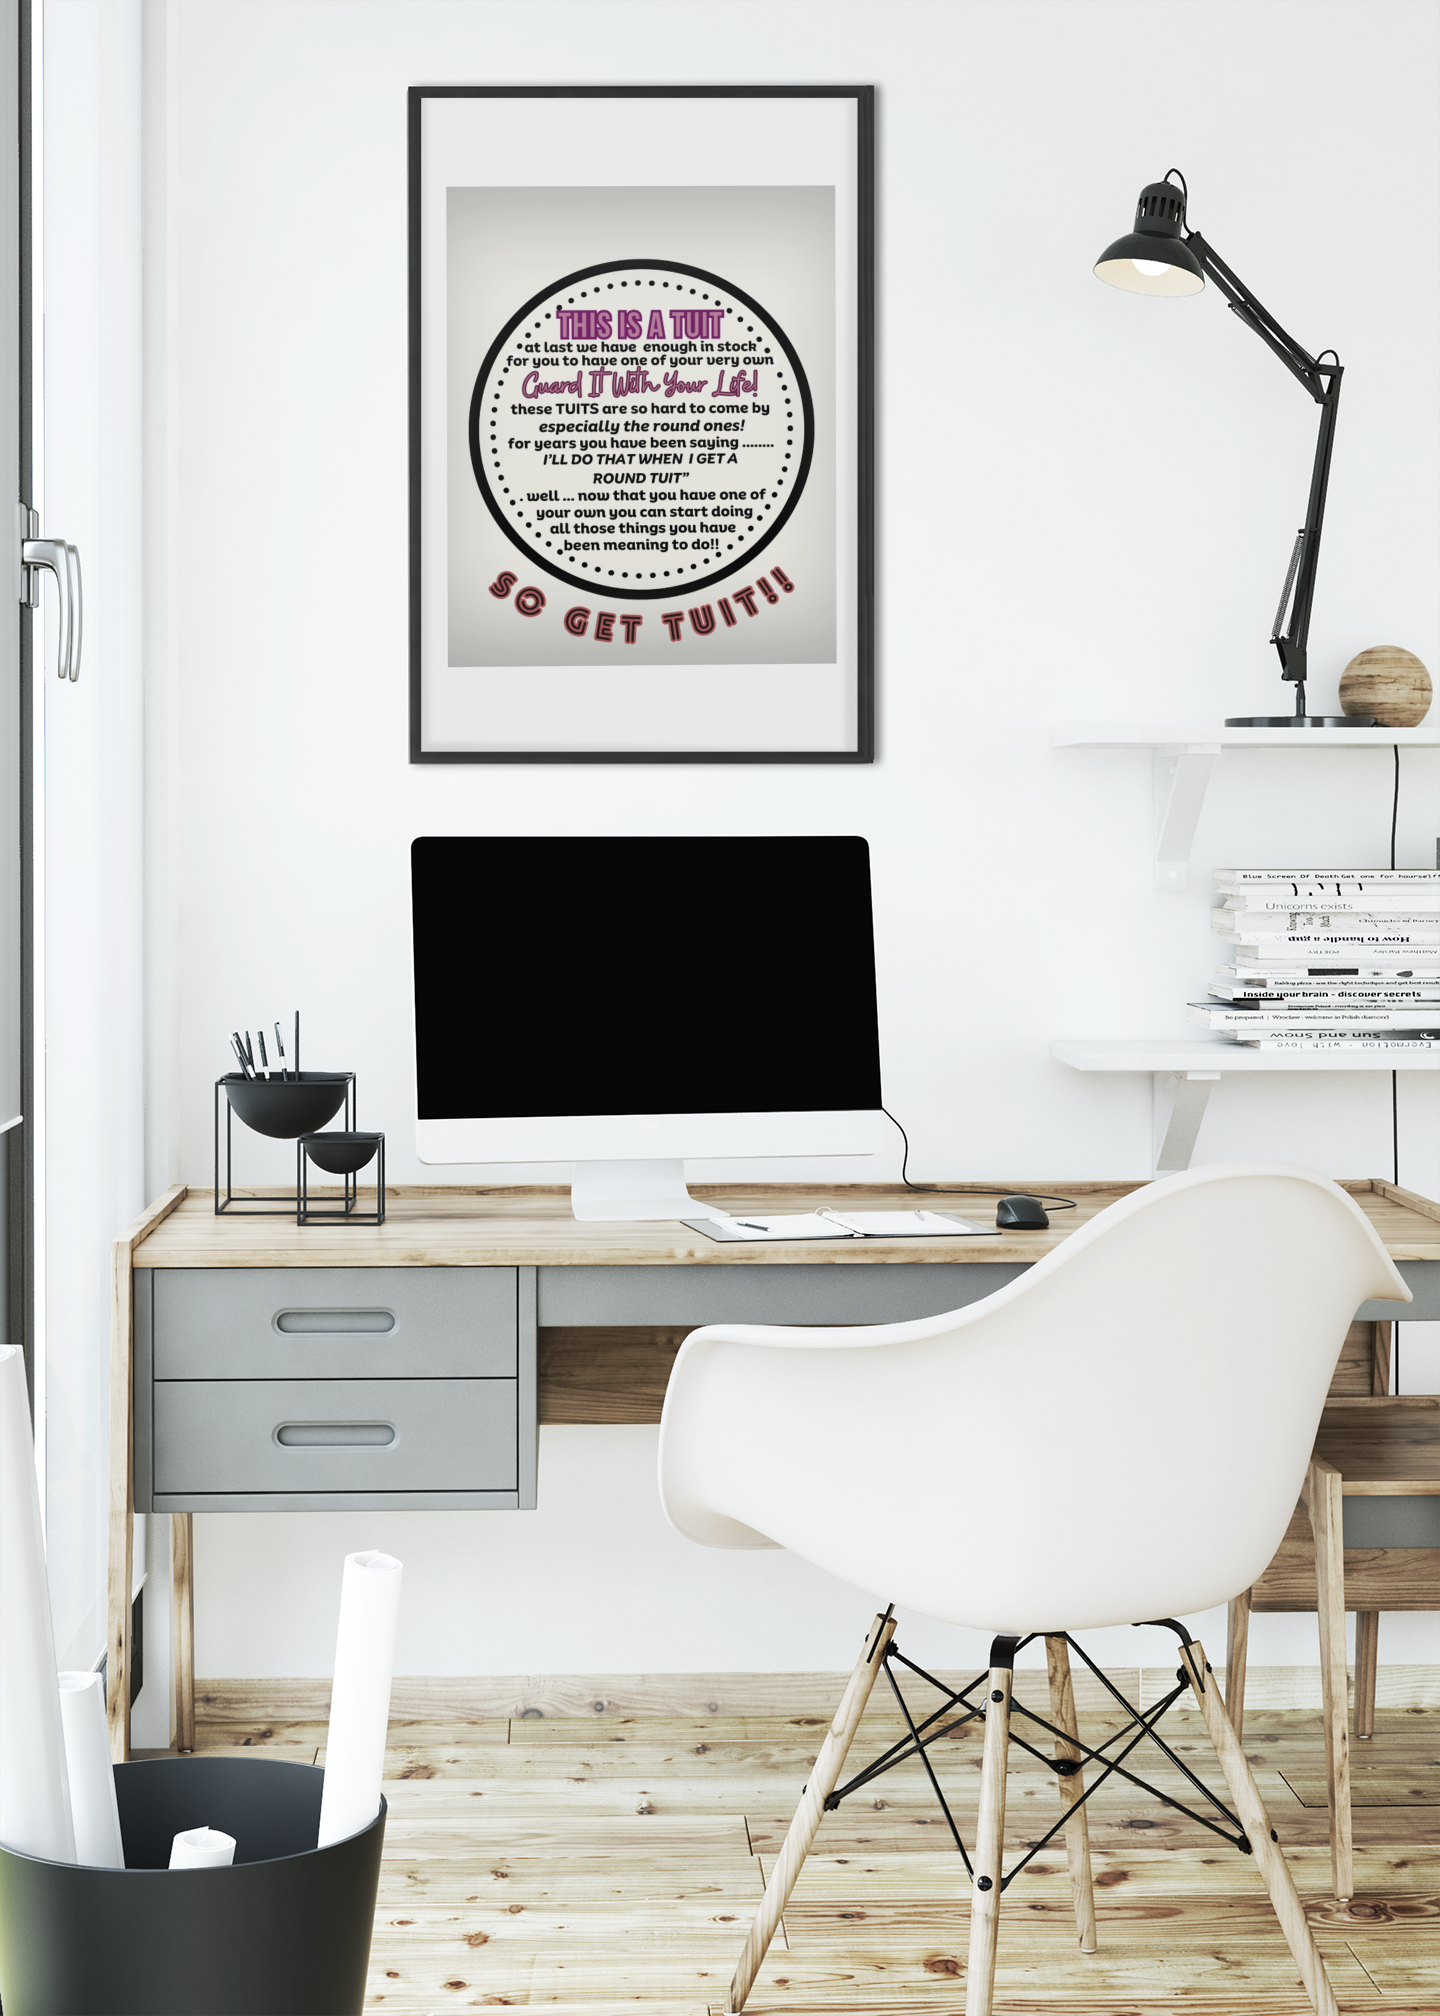 THE ROUND TUIT - QUIRKY UNIQUE WALL ART featuring a positive and humorous affirmation in tones of MAUVE.